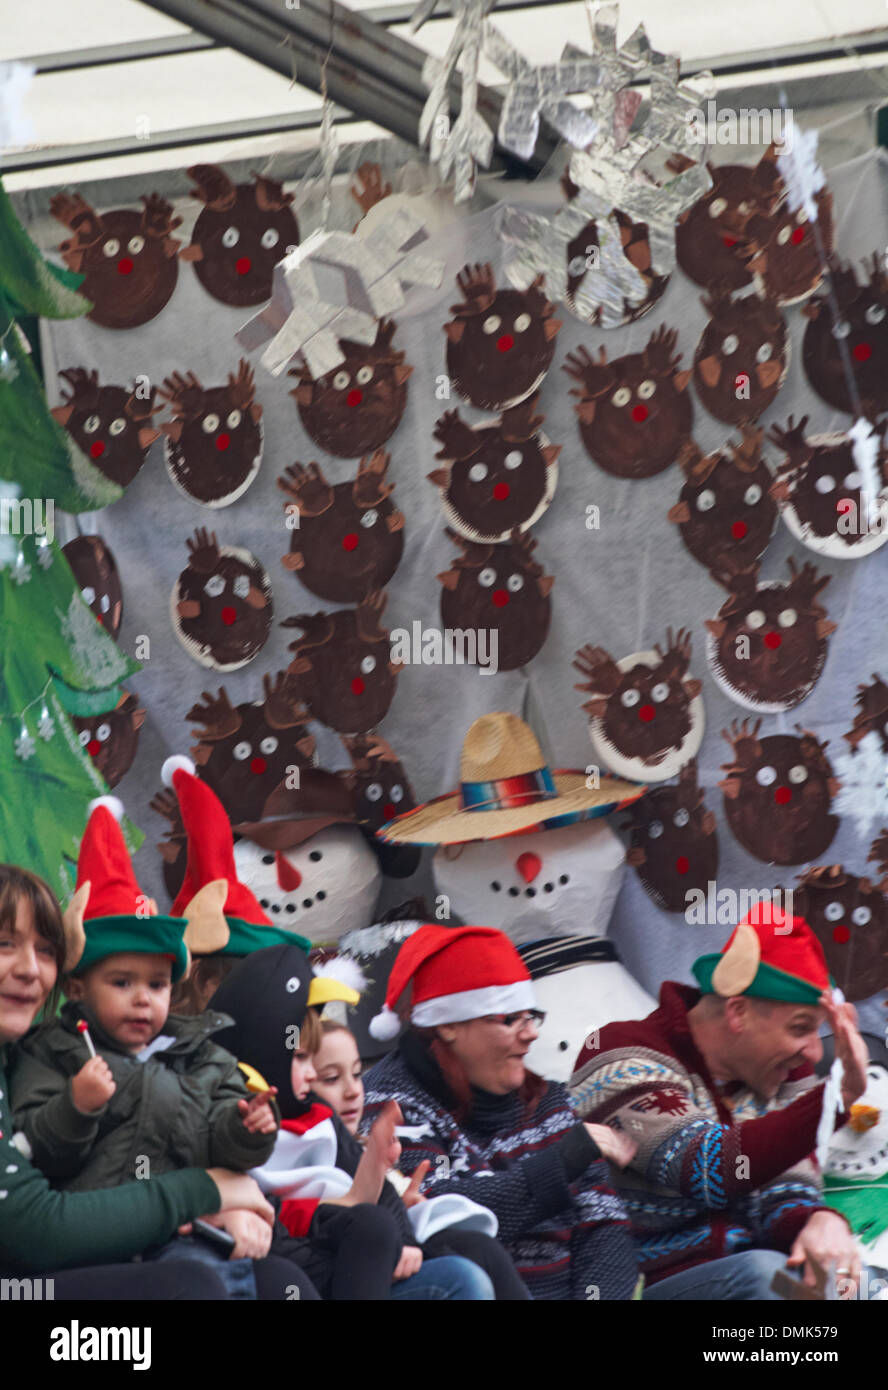 Wimborne, Dorset, UK. 14th December 2013. Crowds turn out to watch the 25th Wimborne Save The Children Christmas Parade. Children on float wearing Christmas Elf hats with snowmen and reindeer faces. Credit:  Carolyn Jenkins/Alamy Live News Stock Photo